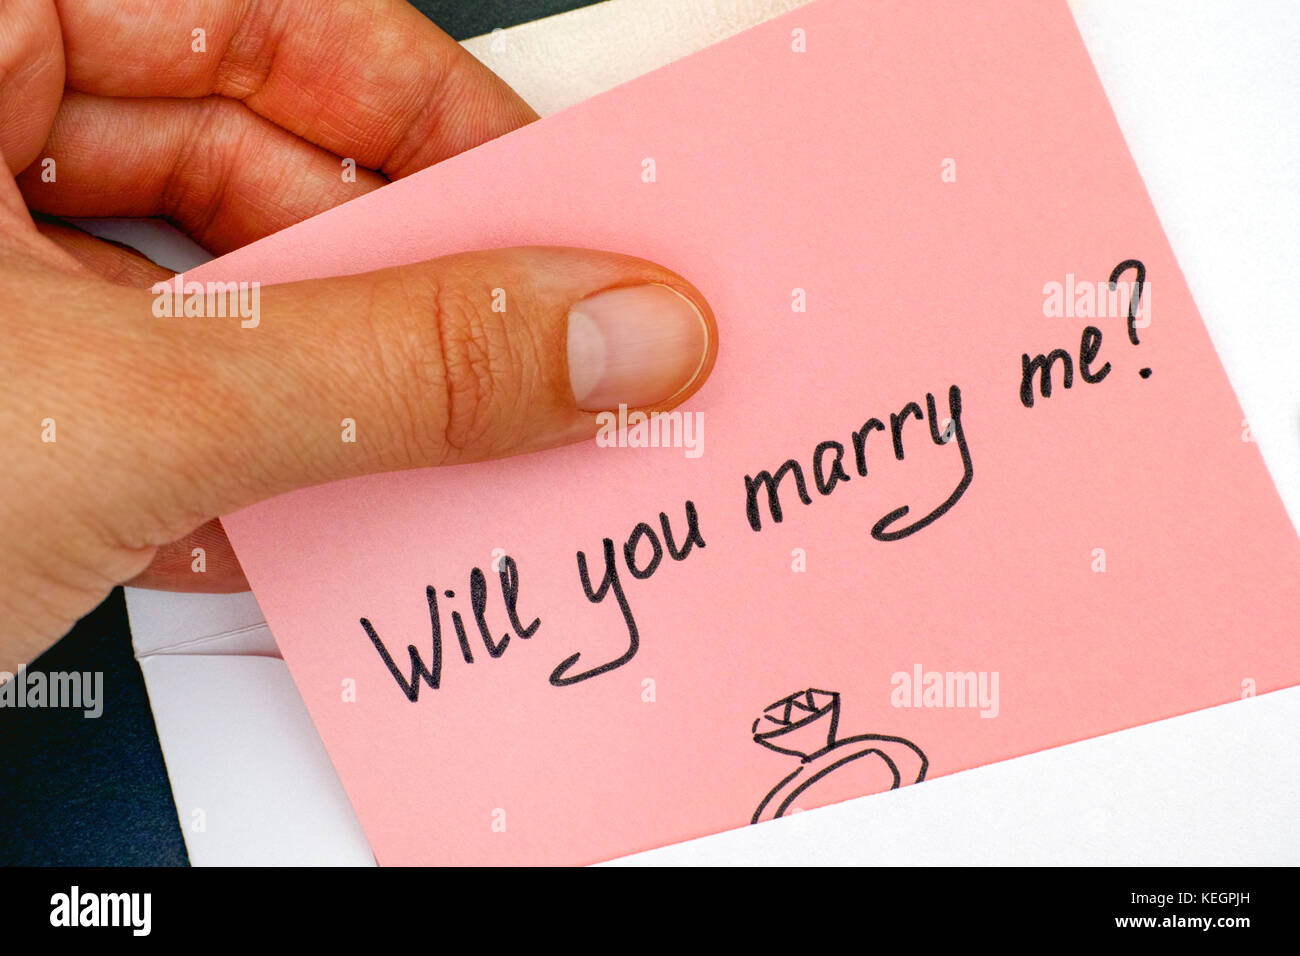 Woman hand taking out letter with text Will you marry me? from envelope. Close-up. Stock Photo